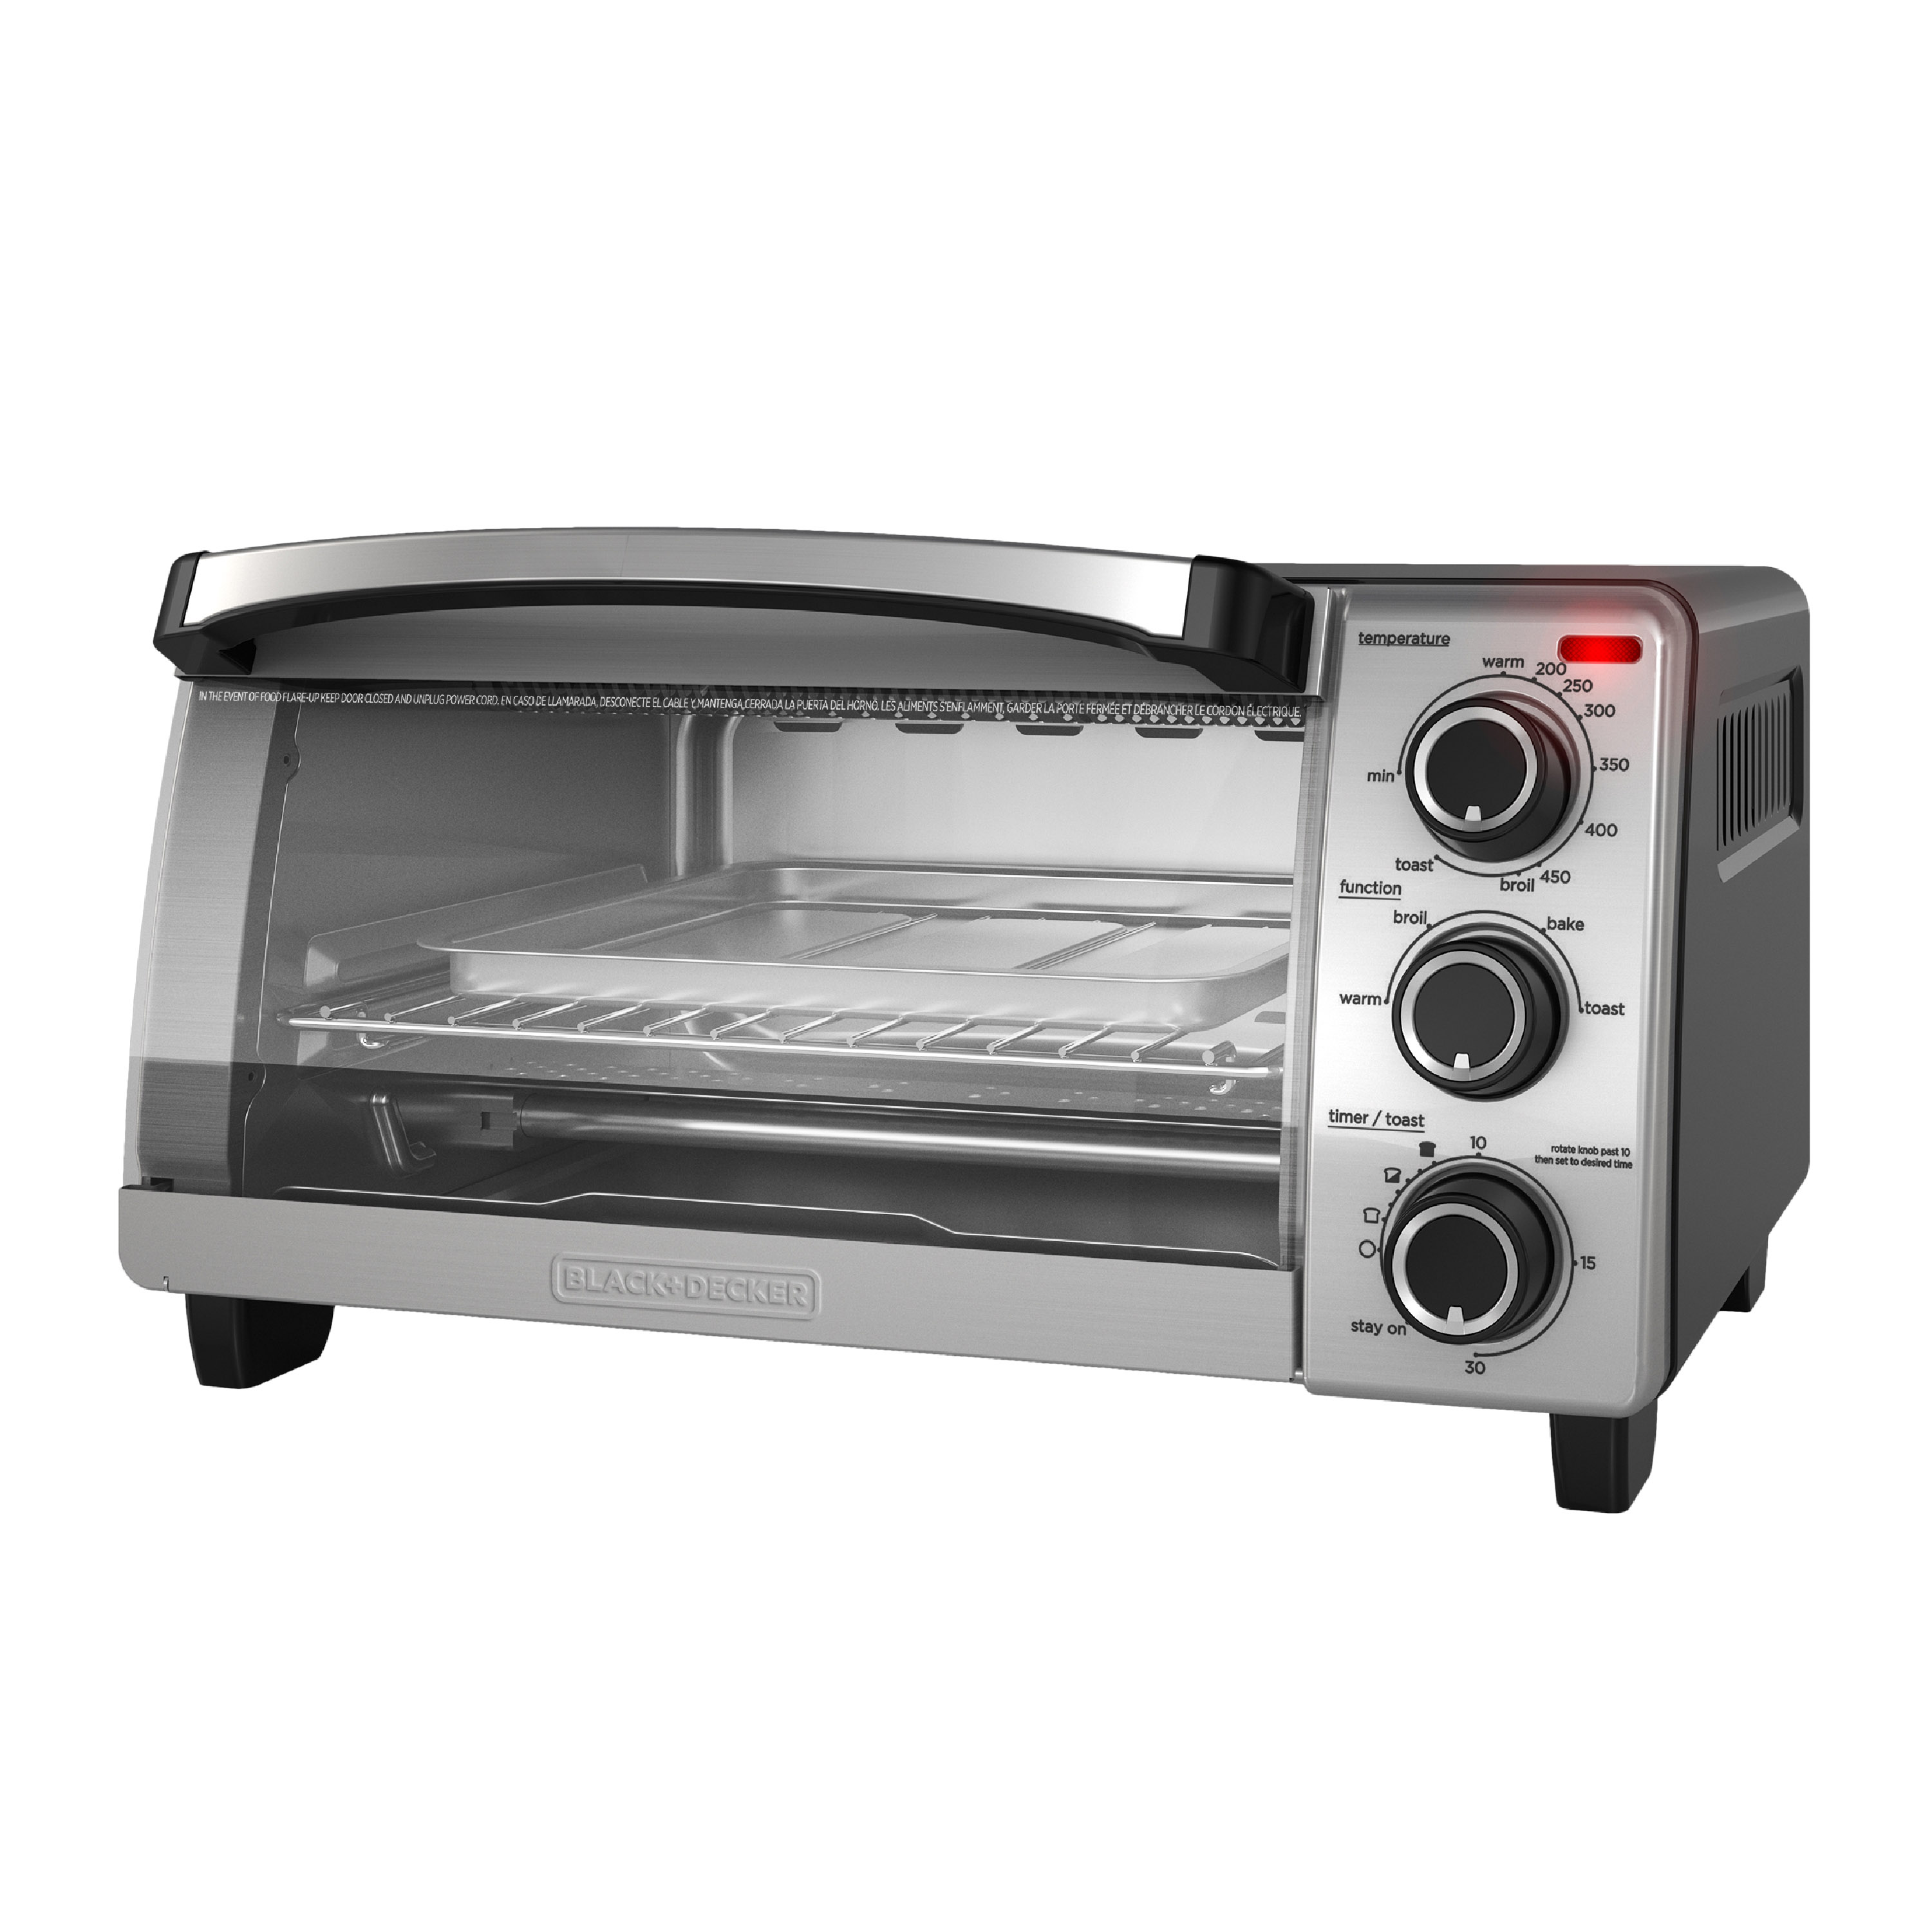 https://s7cdn.spectrumbrands.com/~/media/SmallAppliancesCA/Black%20and%20Decker/Product%20Page/cooking%20appliances/Toaster%20Ovens/TO1755SB/TO1755SB.jpg?h=3001&la=en&w=3001